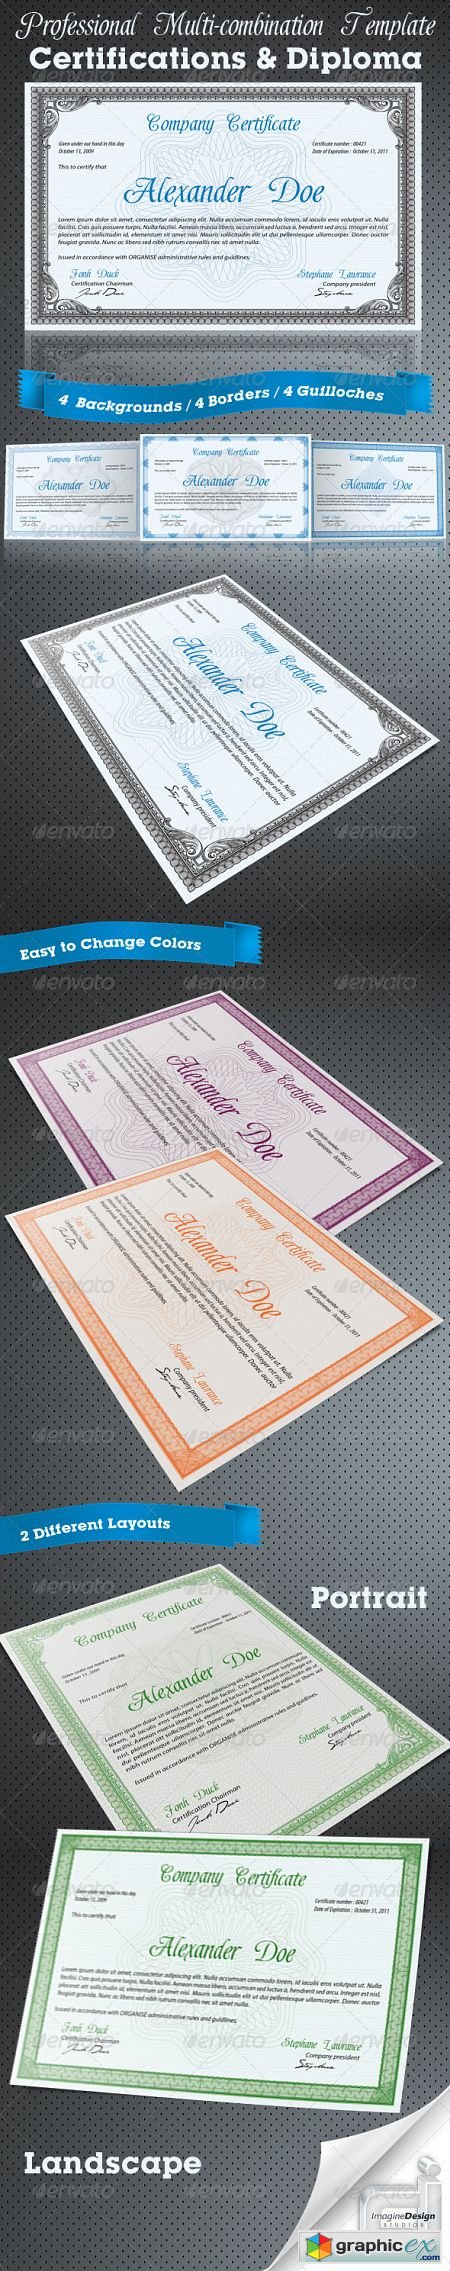 Professional Certificate or Diploma Templates